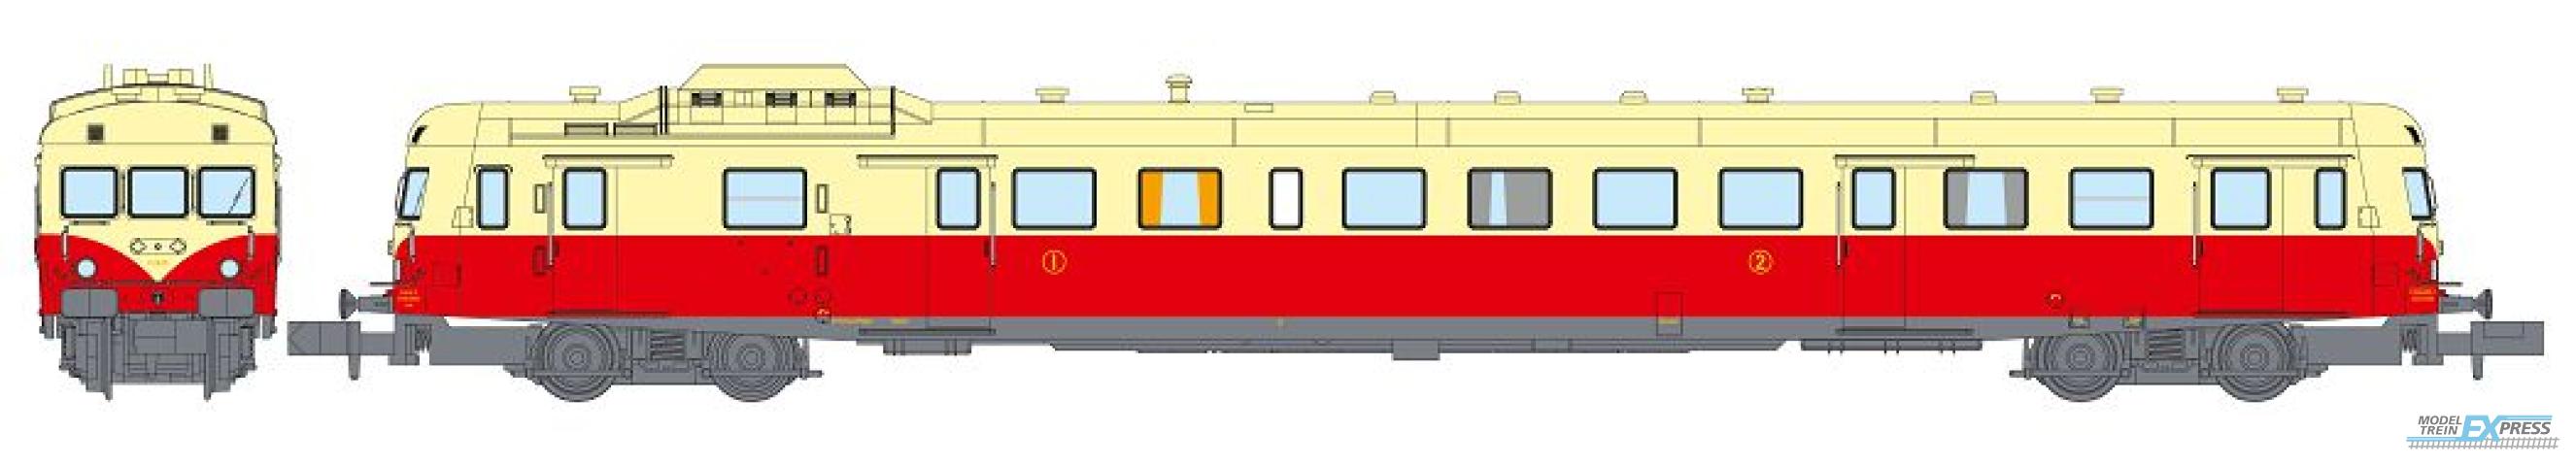 REE models NW-248S X-2848 Cream Roof 1st / 2nd class - TOULOUSE Era III-IV DCC SOUND